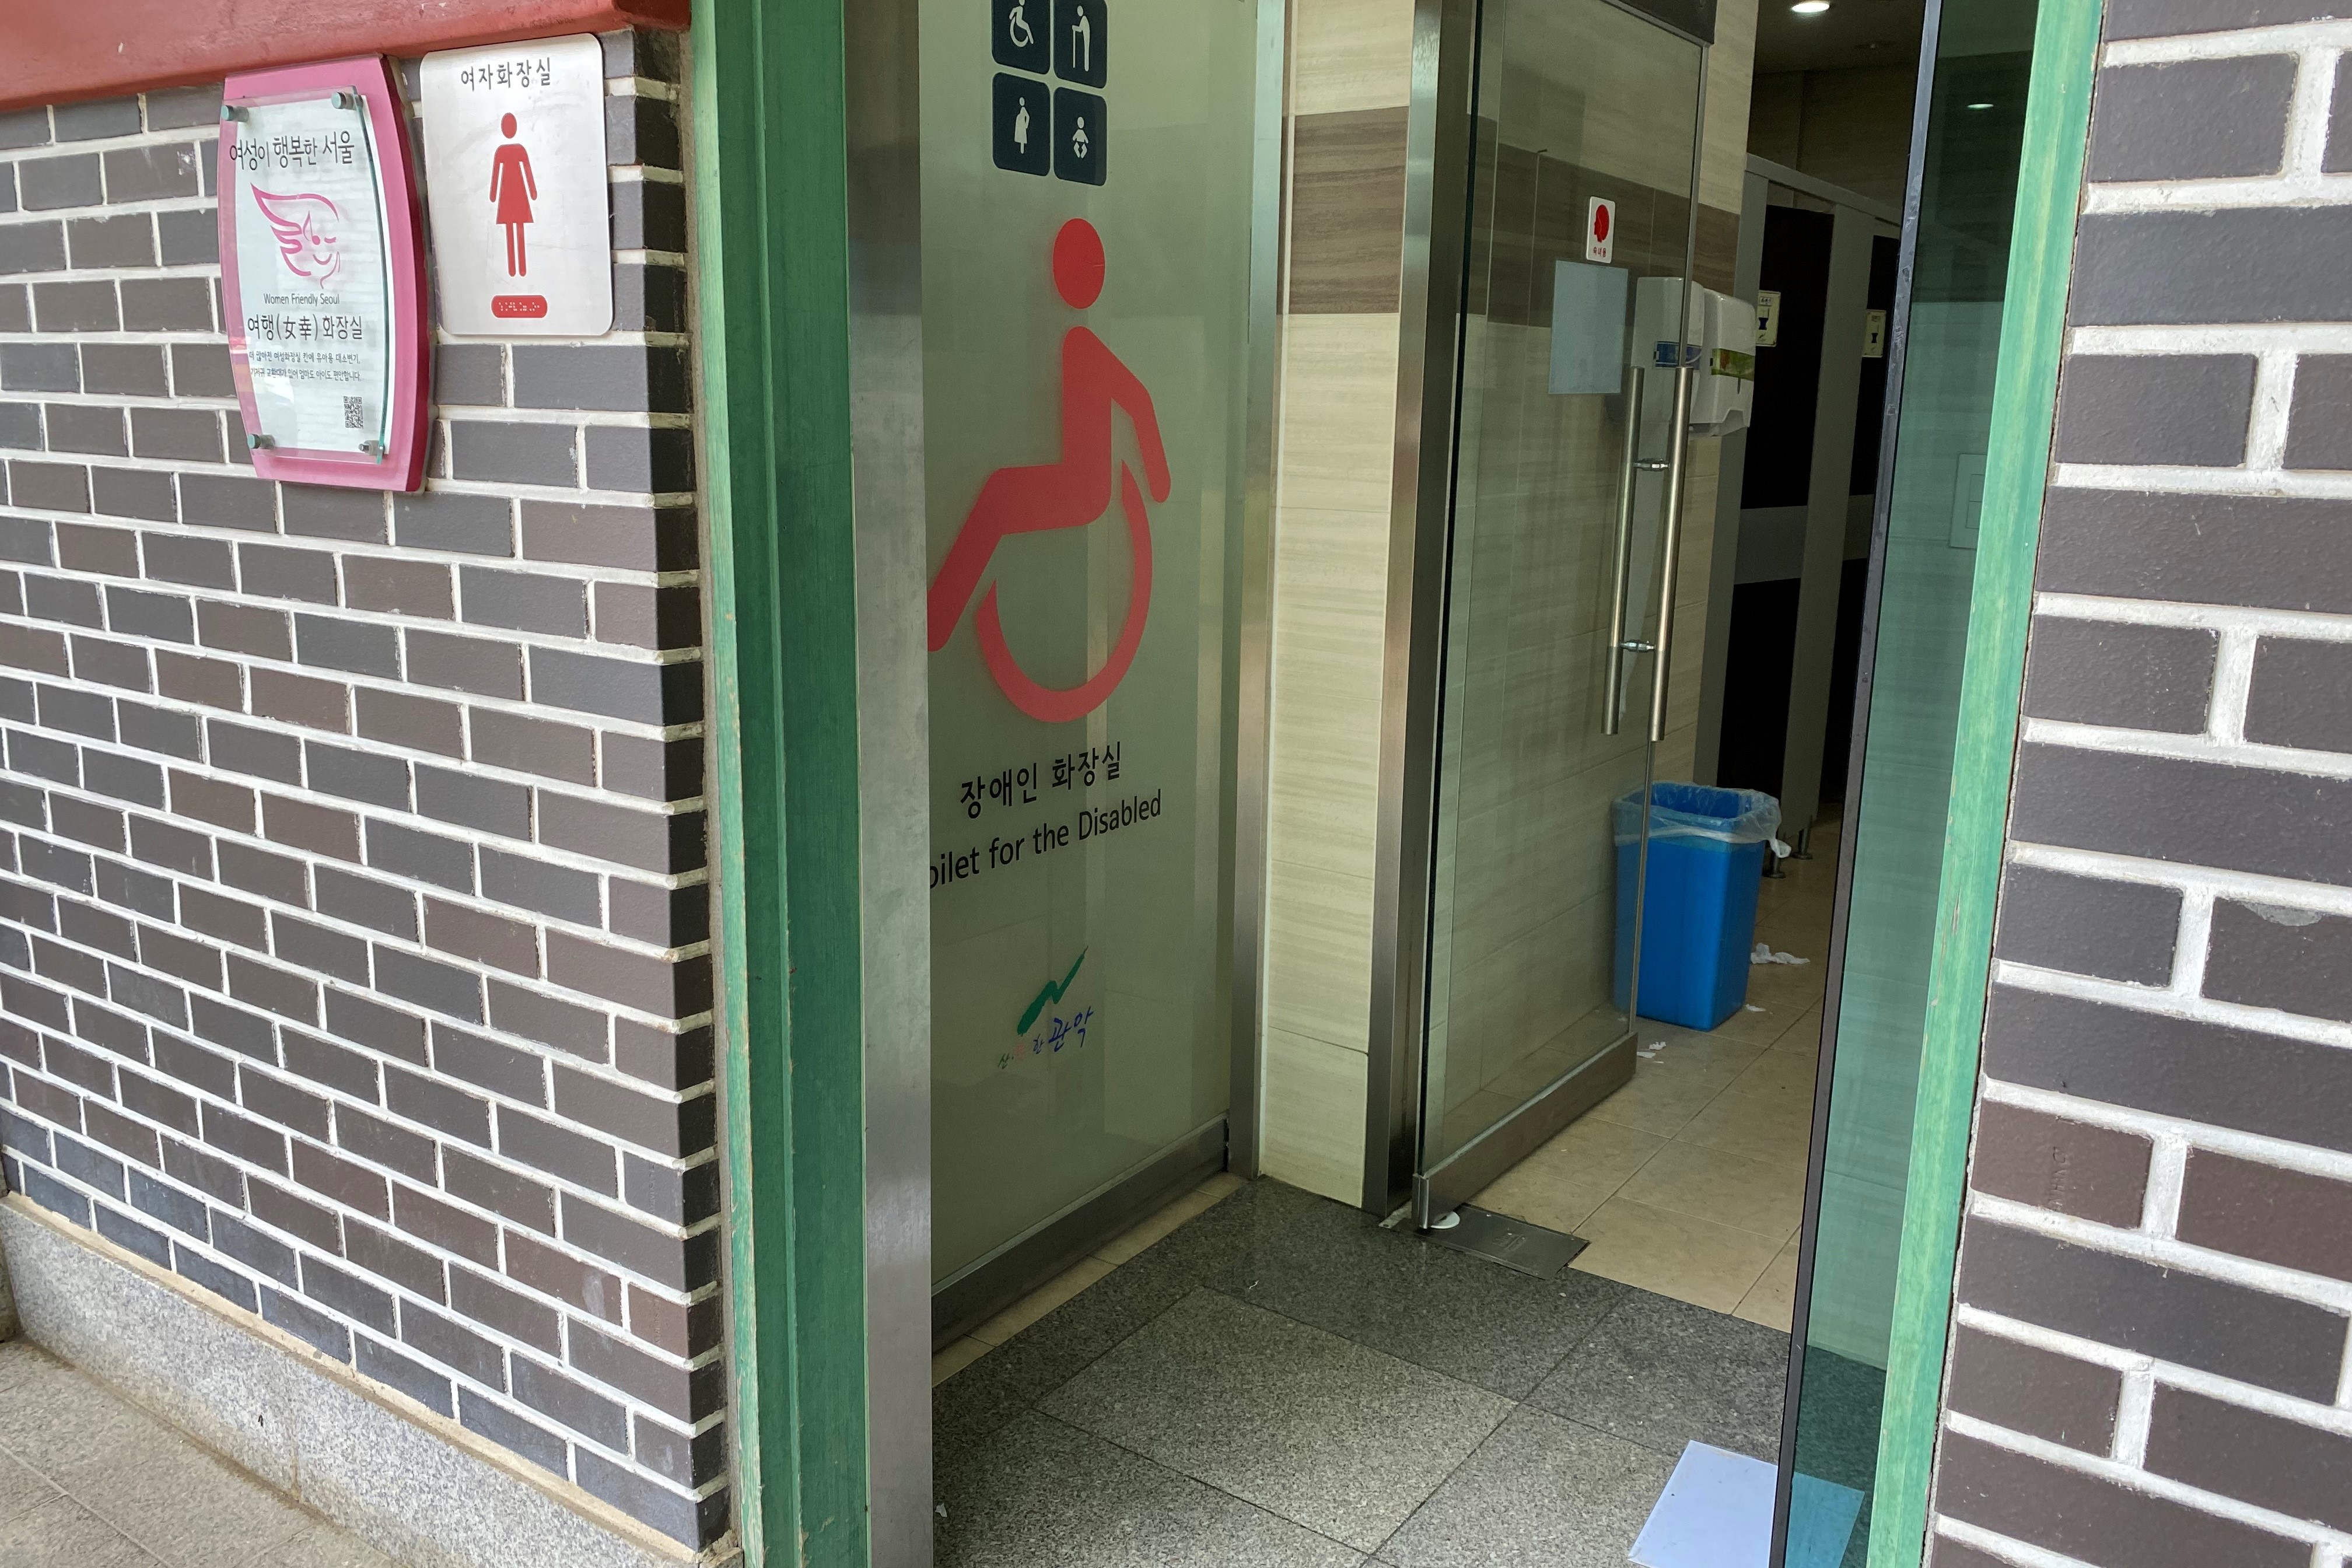 Accessible Restroom 0 : Entrance of the accessible restroom in Nakseoungdae Park